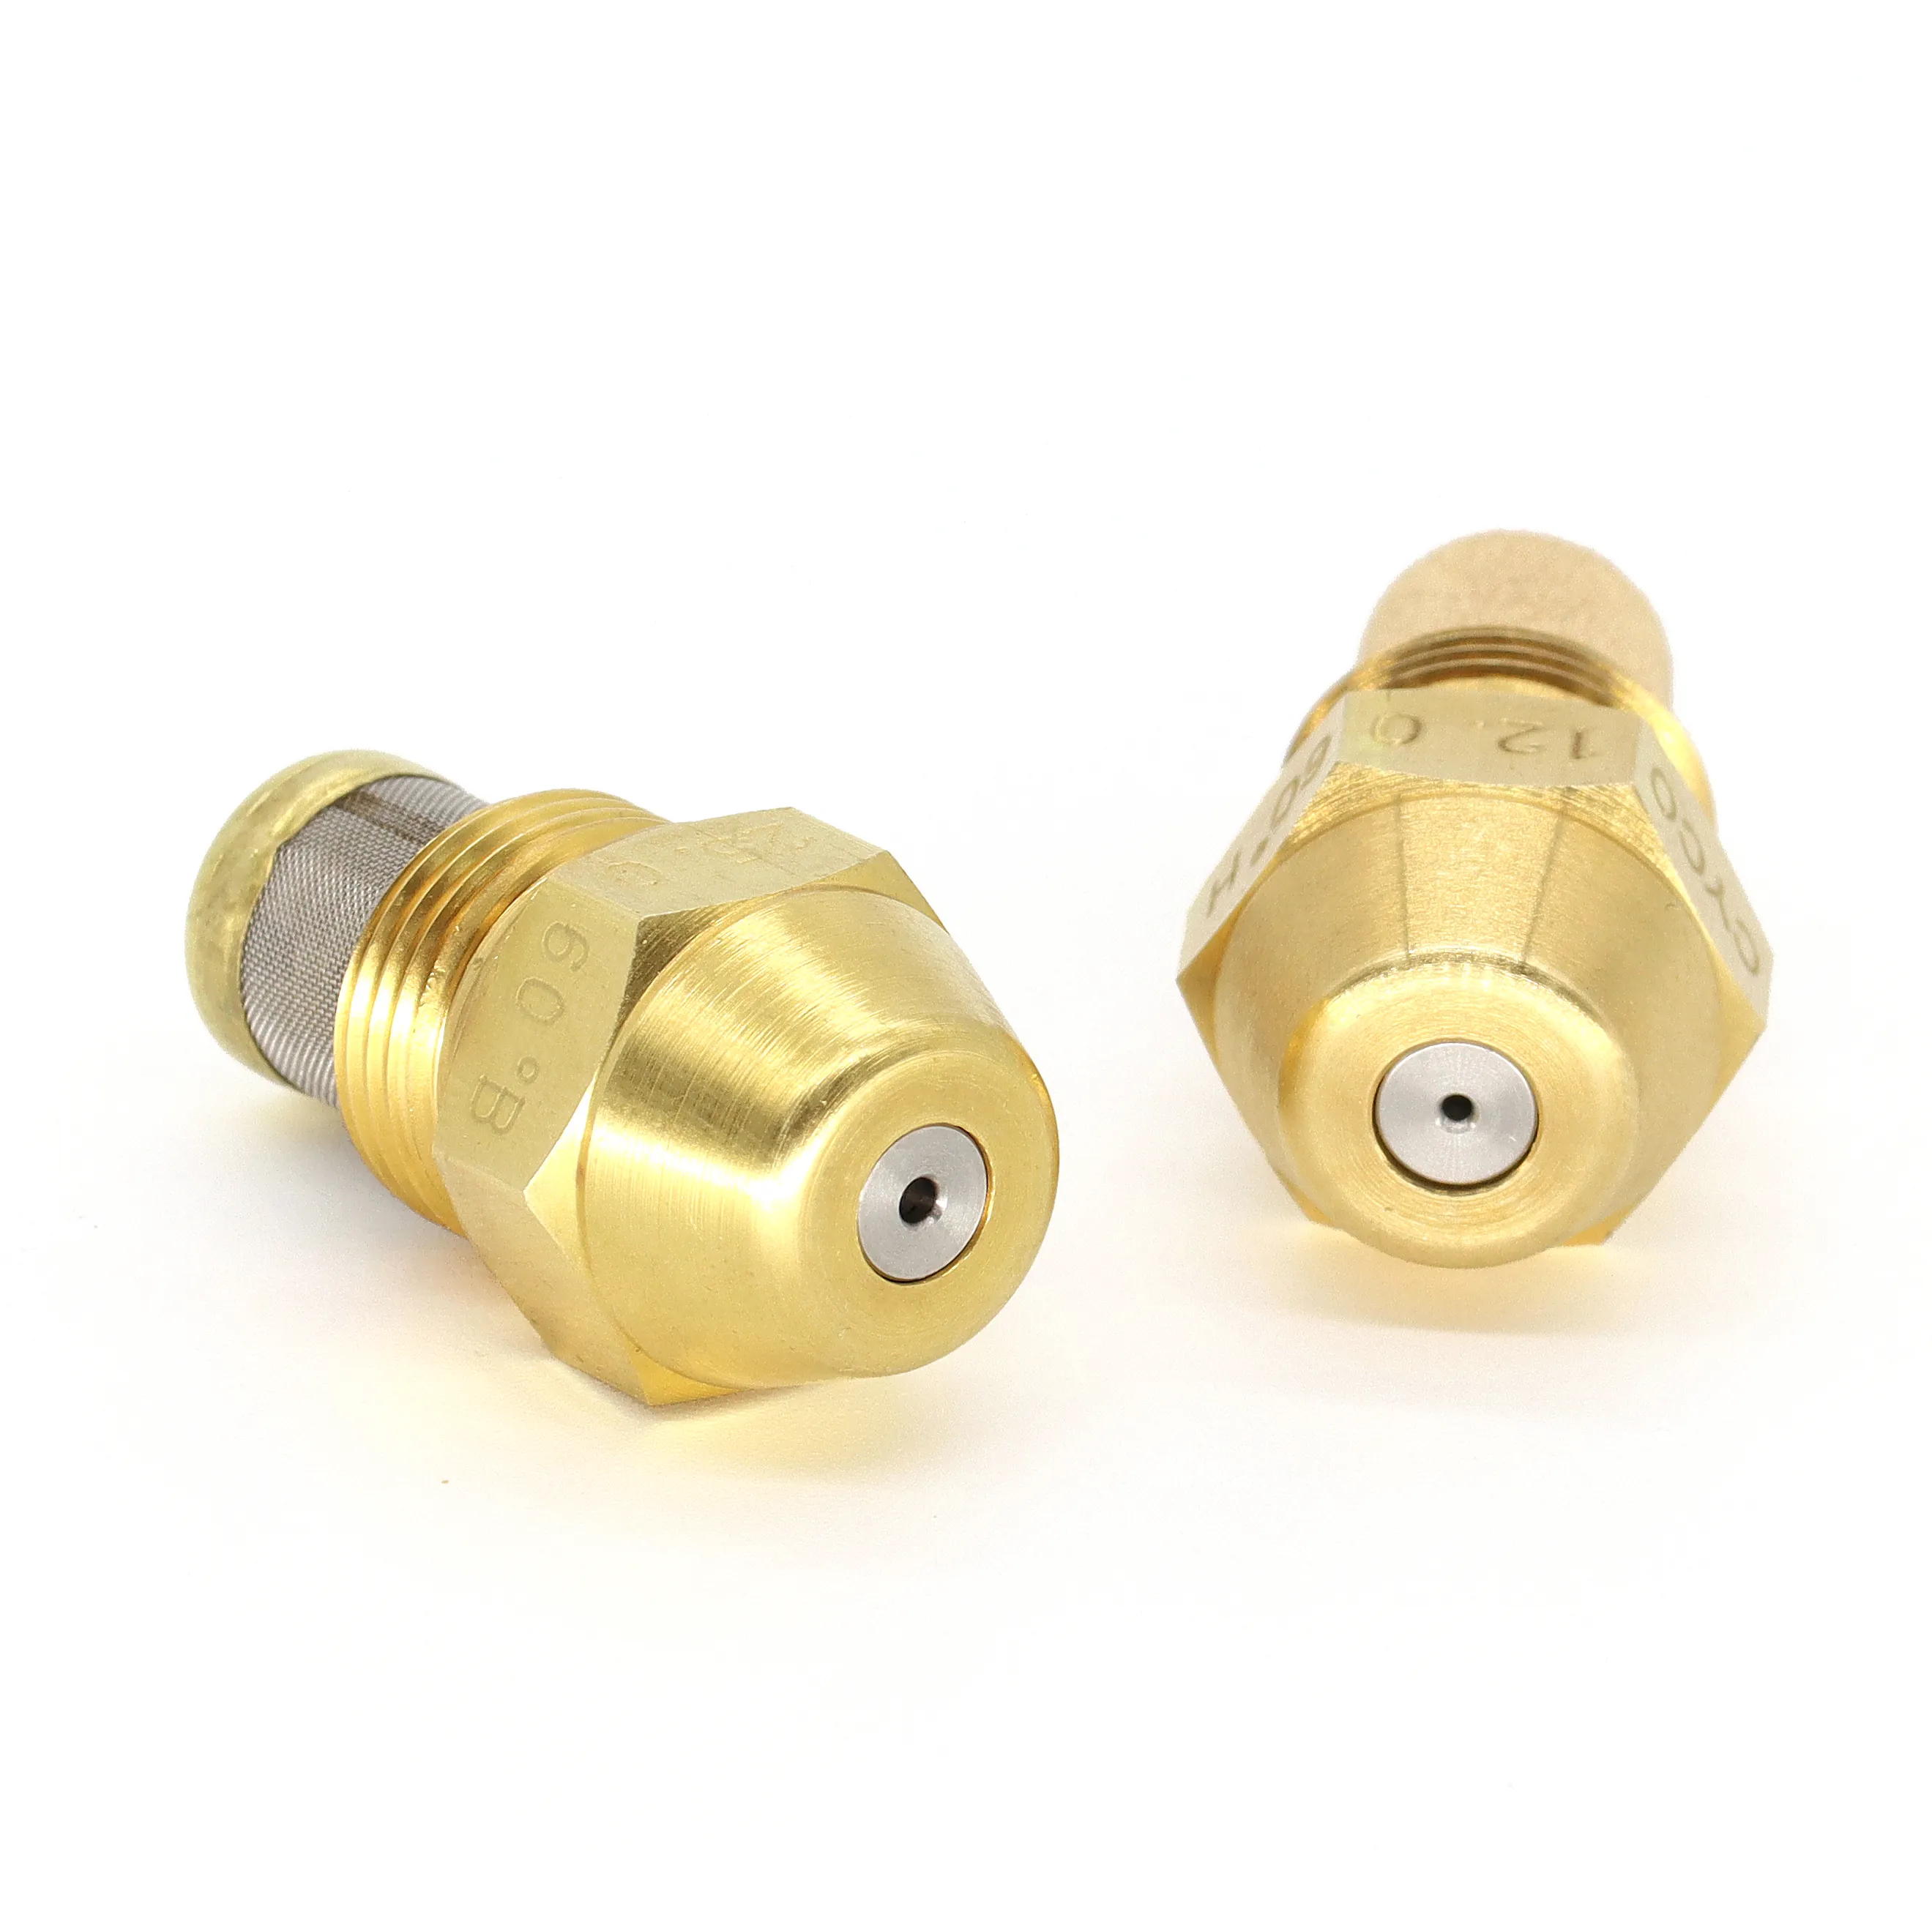 CYCO 80 Degree Spray Angle Mpa Brass Industrial Fuel Waster Oil Burner Nozzle